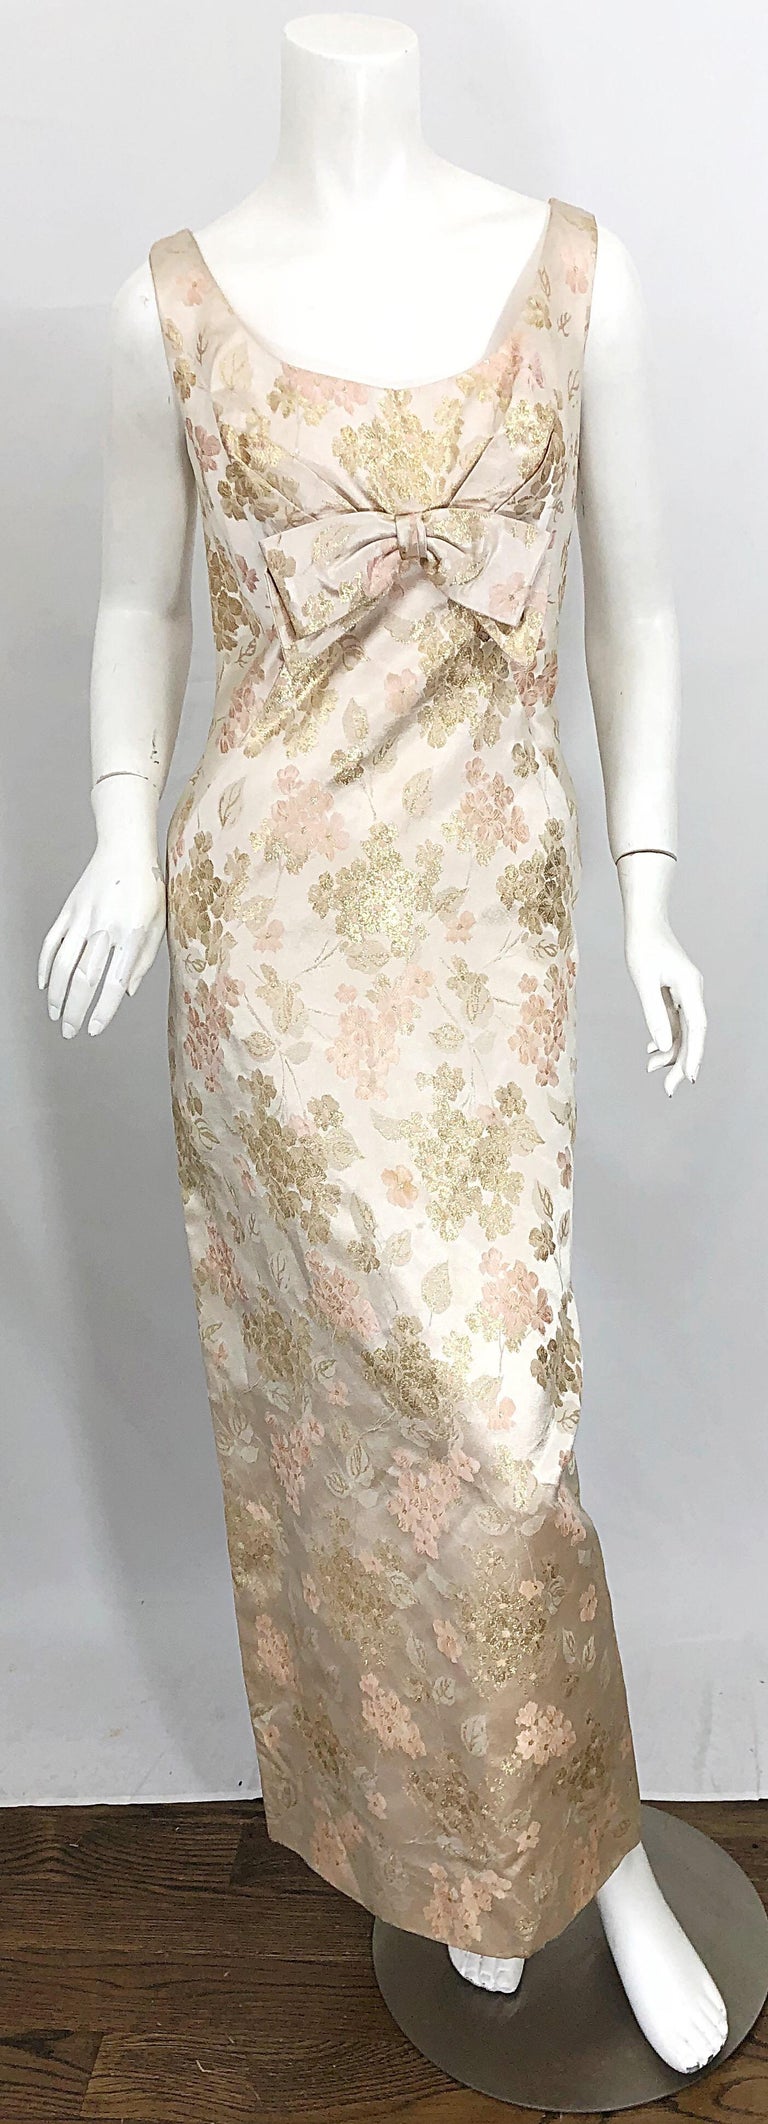 Beautiful 1960s demi couture ivory, light pink and gold metallic flower printed silk gown! Features impeccable construction with heavy attention to details. Tailored bodice with a large bow at center bust. Hidden metal zipper up the back with